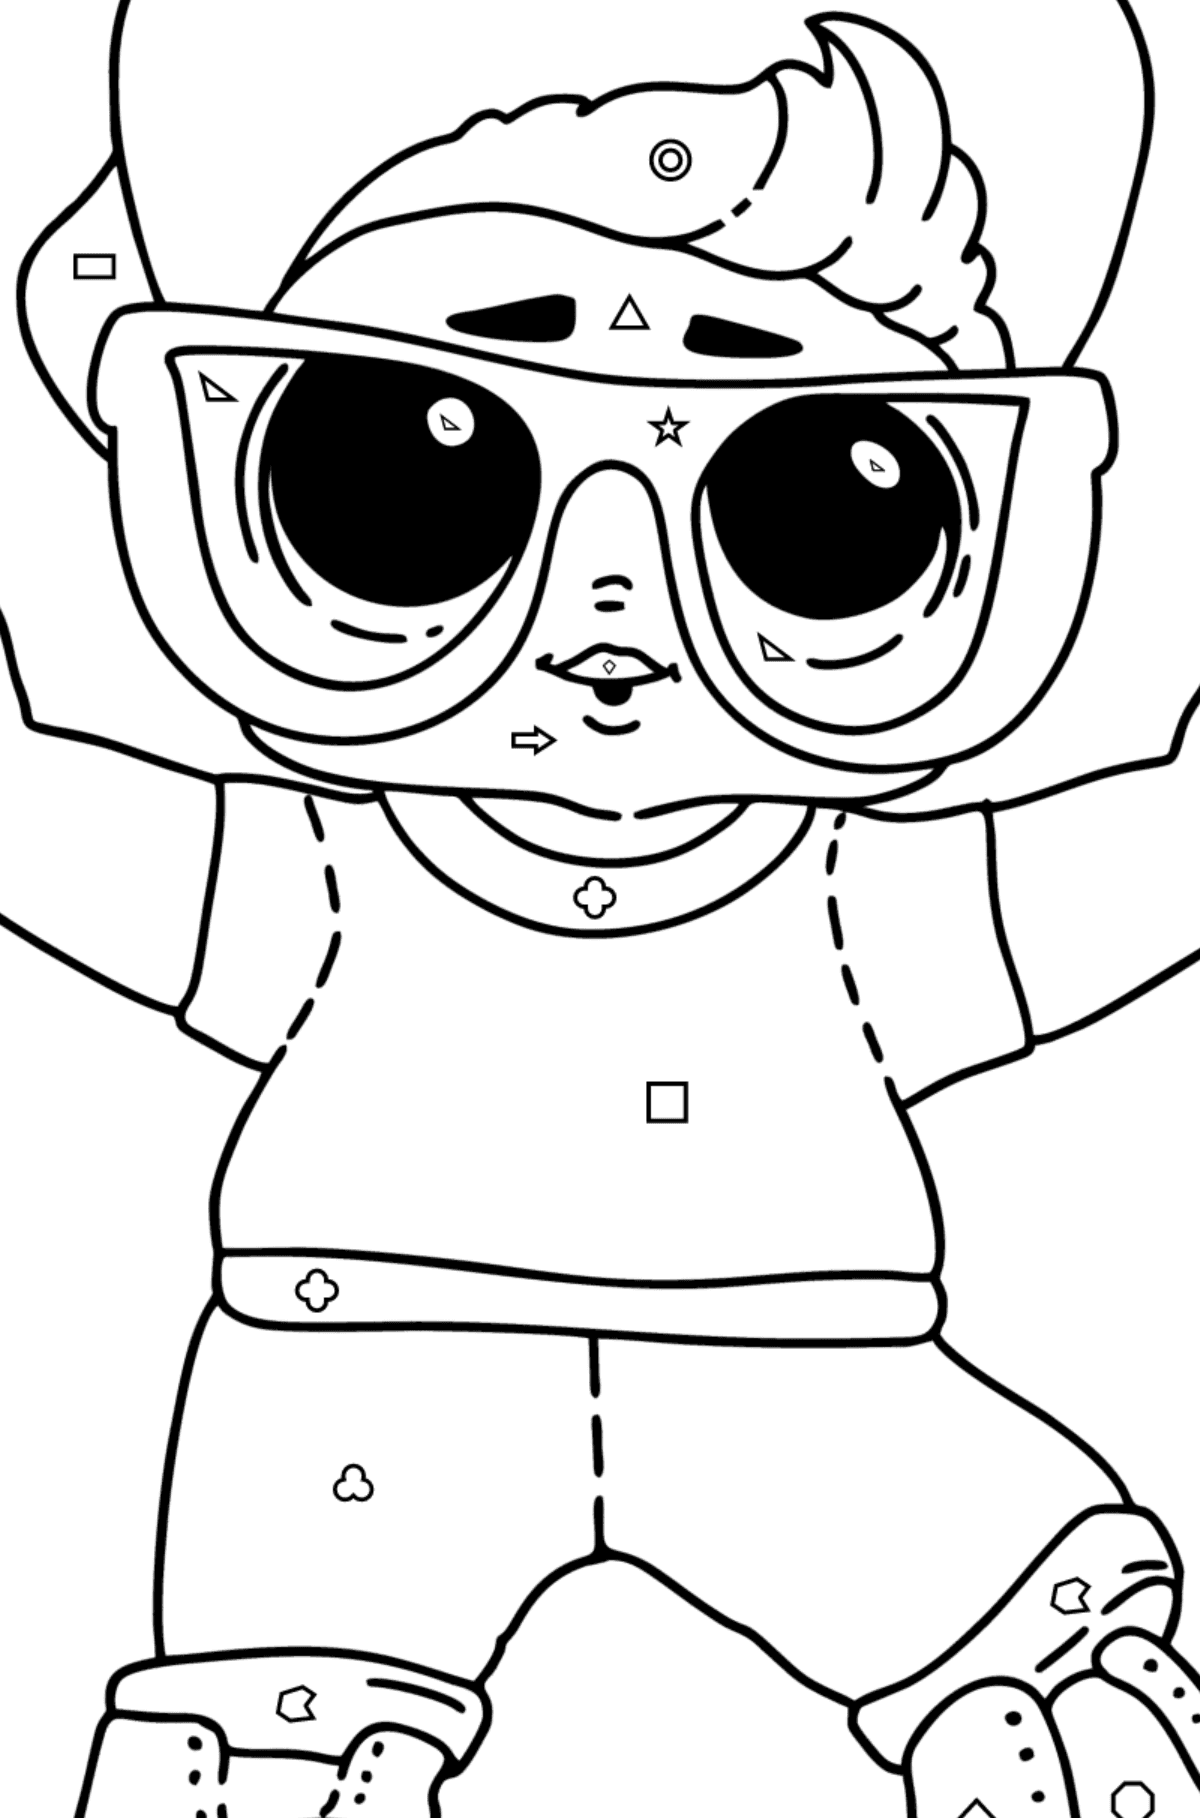 Coloring page LOL boy Next Door - Coloring by Geometric Shapes for Kids